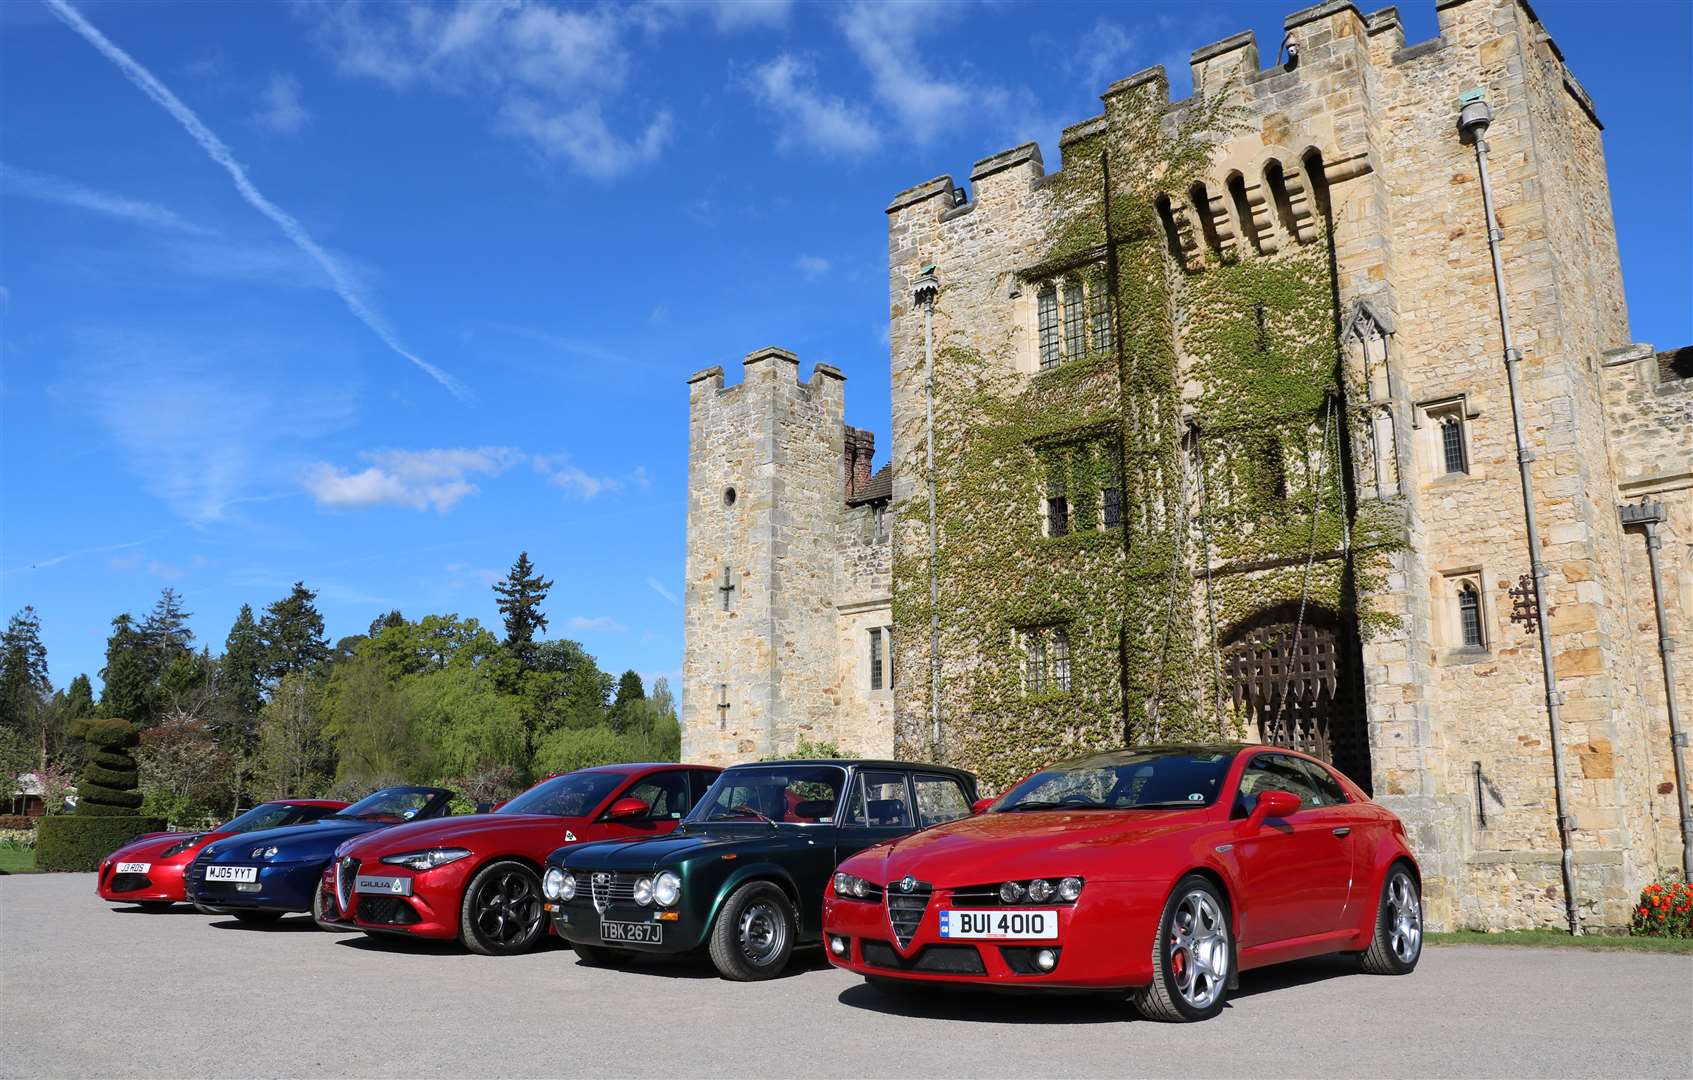 Classic cars will be lining up at Hever Castle this weekend